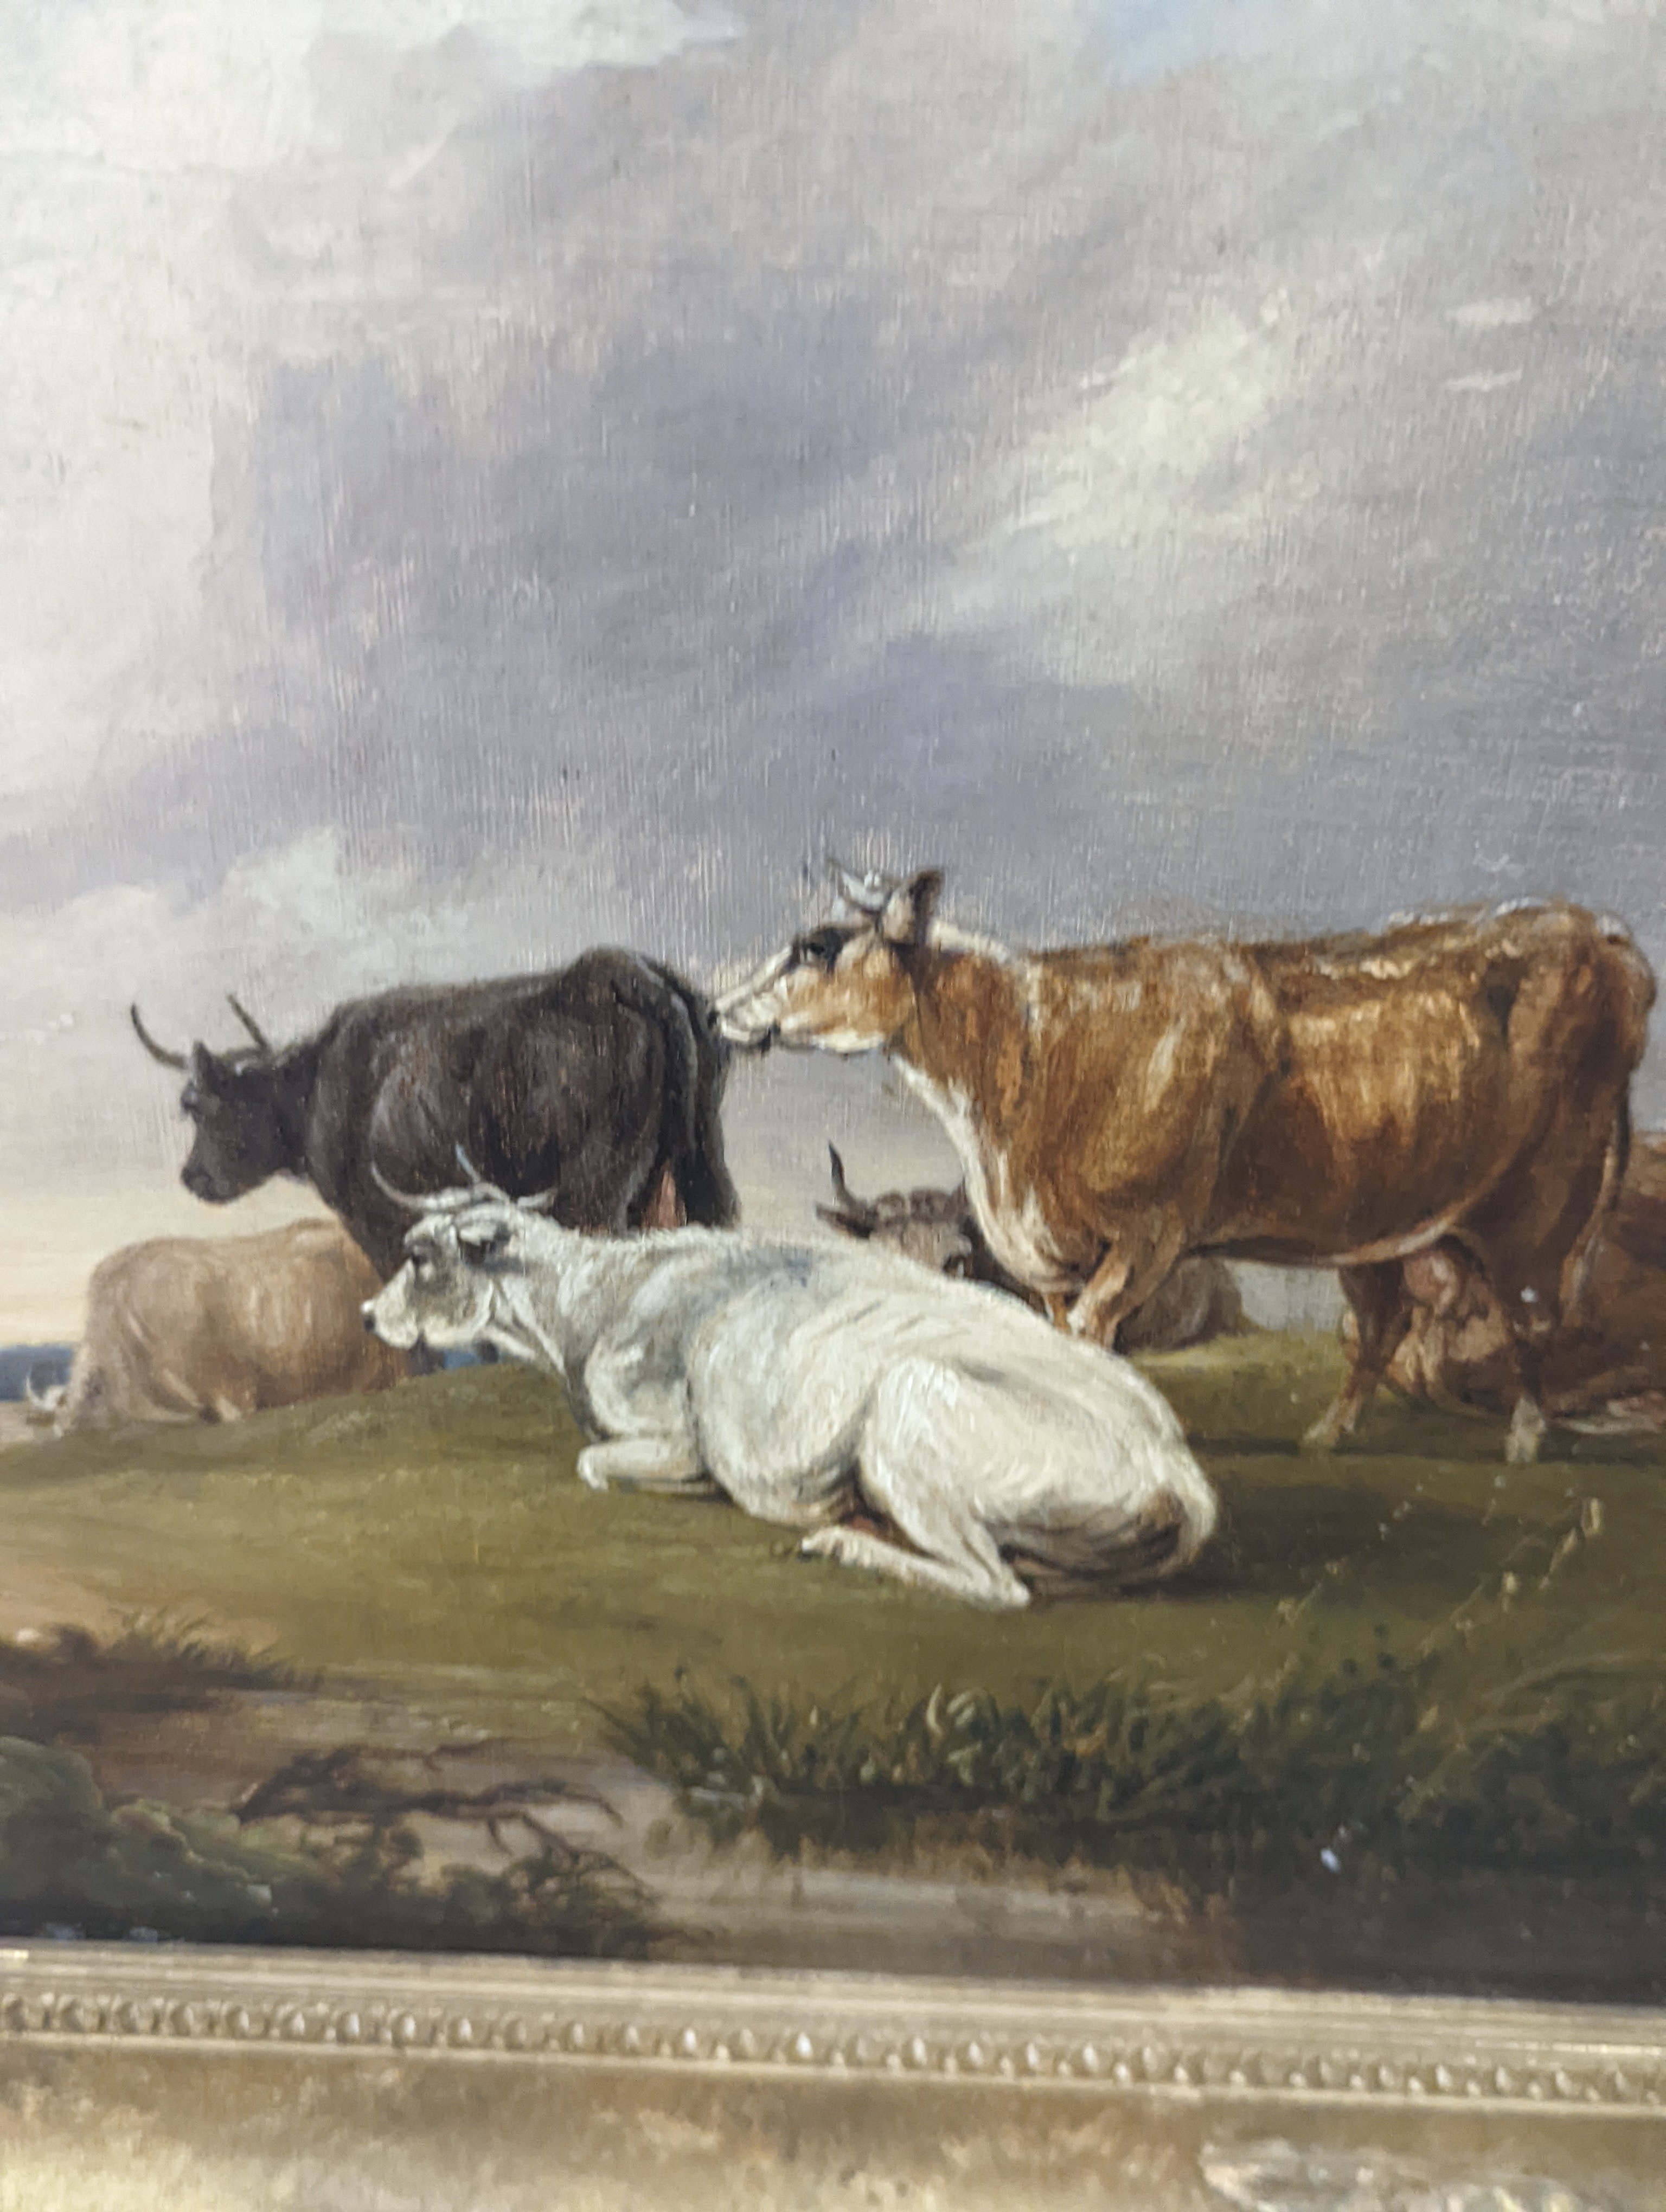 Manner of Thomas Sidney Cooper, oil on canvas, Cattle and donkey in a landscape, 28 x 37cm